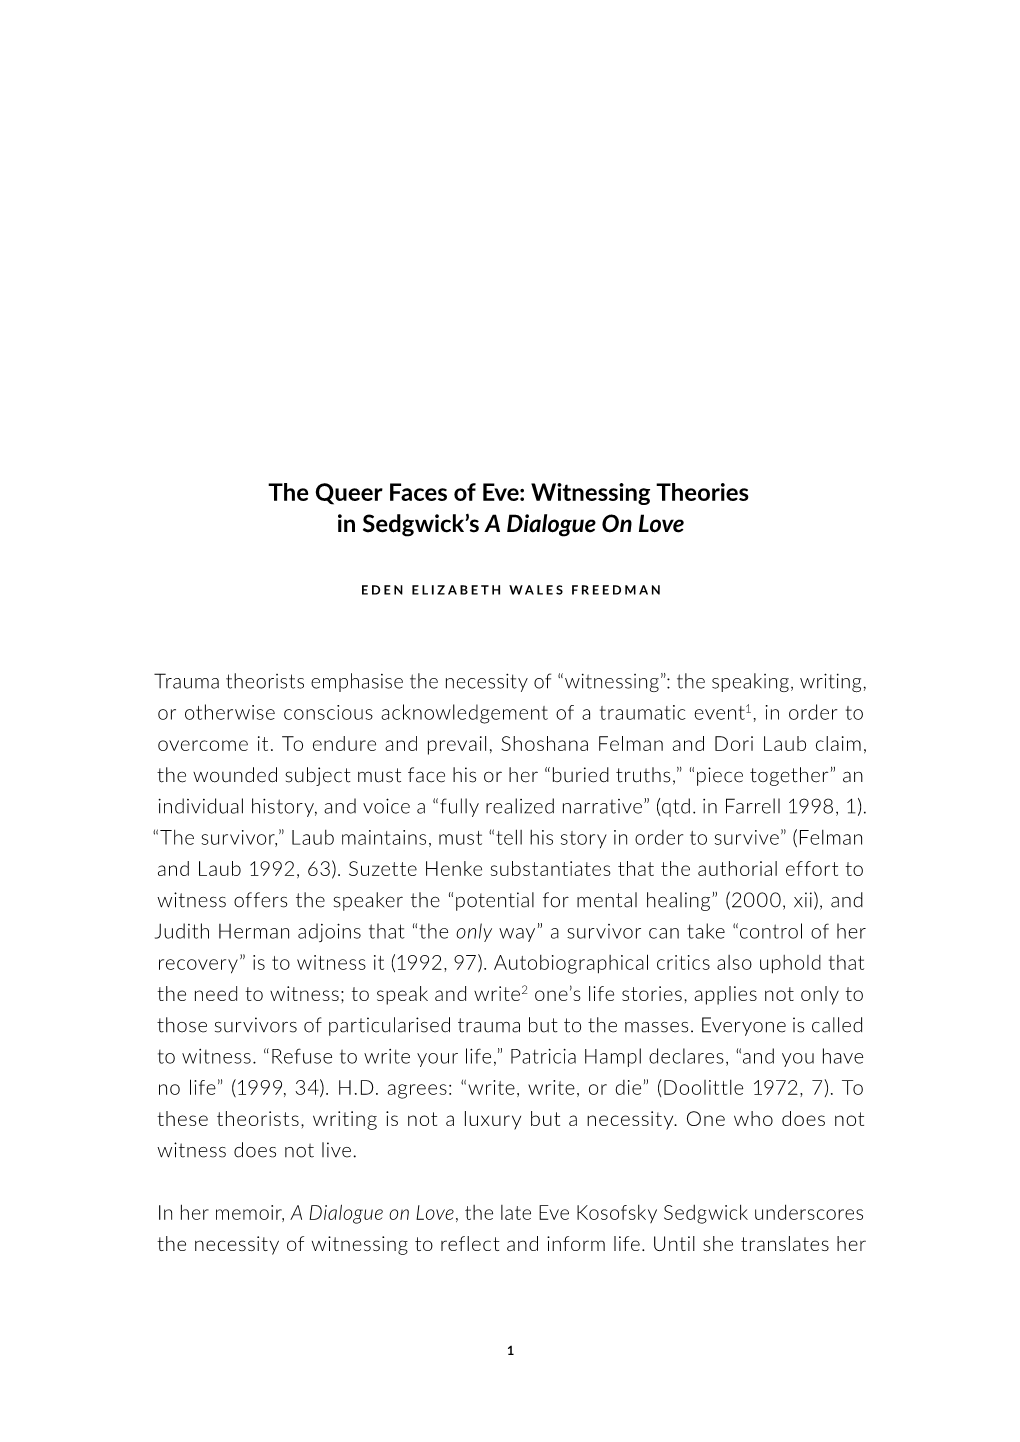 The Queer Faces of Eve: Witnessing Theories in Sedgwick's a Dialogue